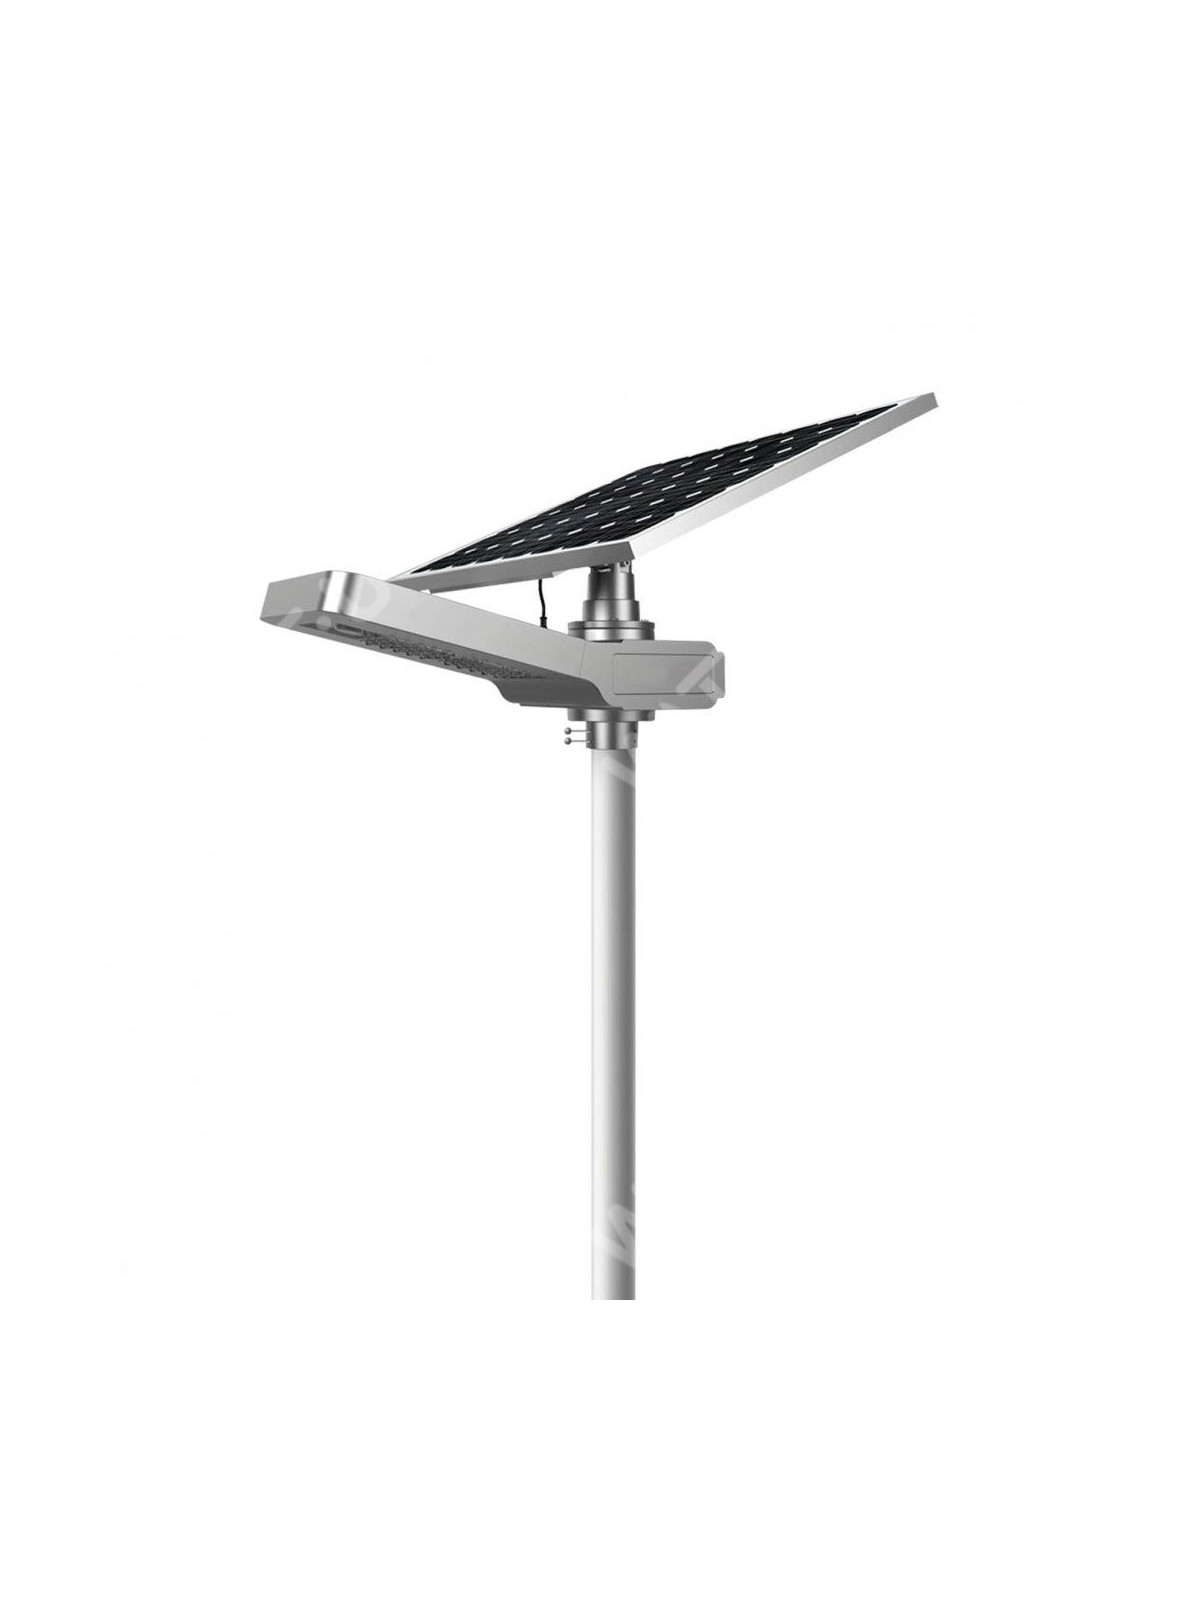 Zonnevloerlamp - Stand-alone LED WU 20W 18V - 65W paneel